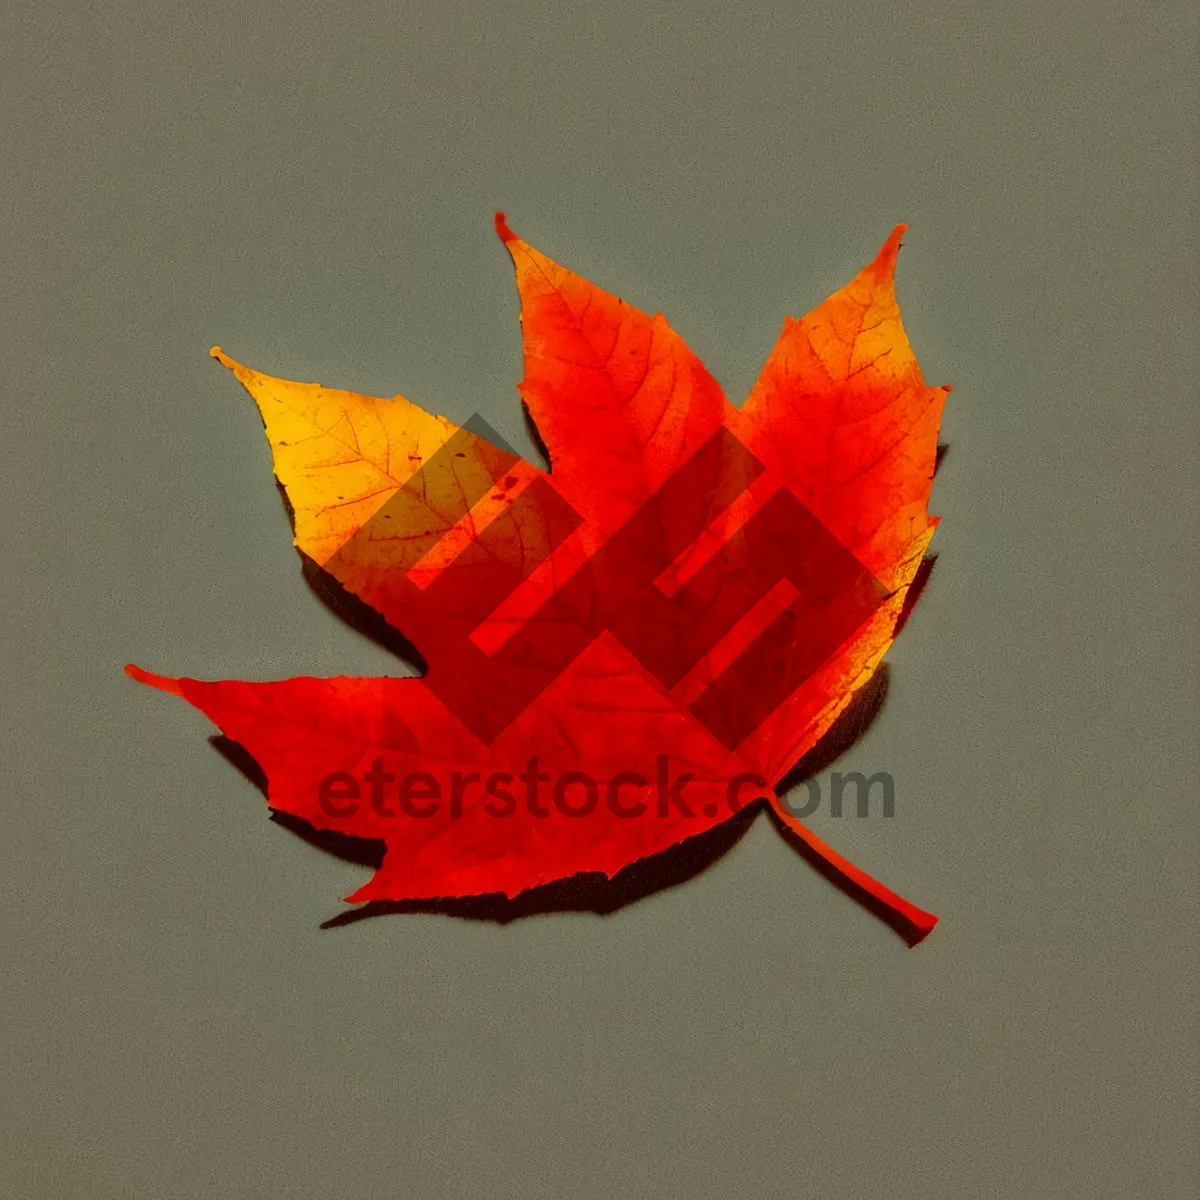 Picture of Vibrant Autumn Maple Leaf with Textured Foliage